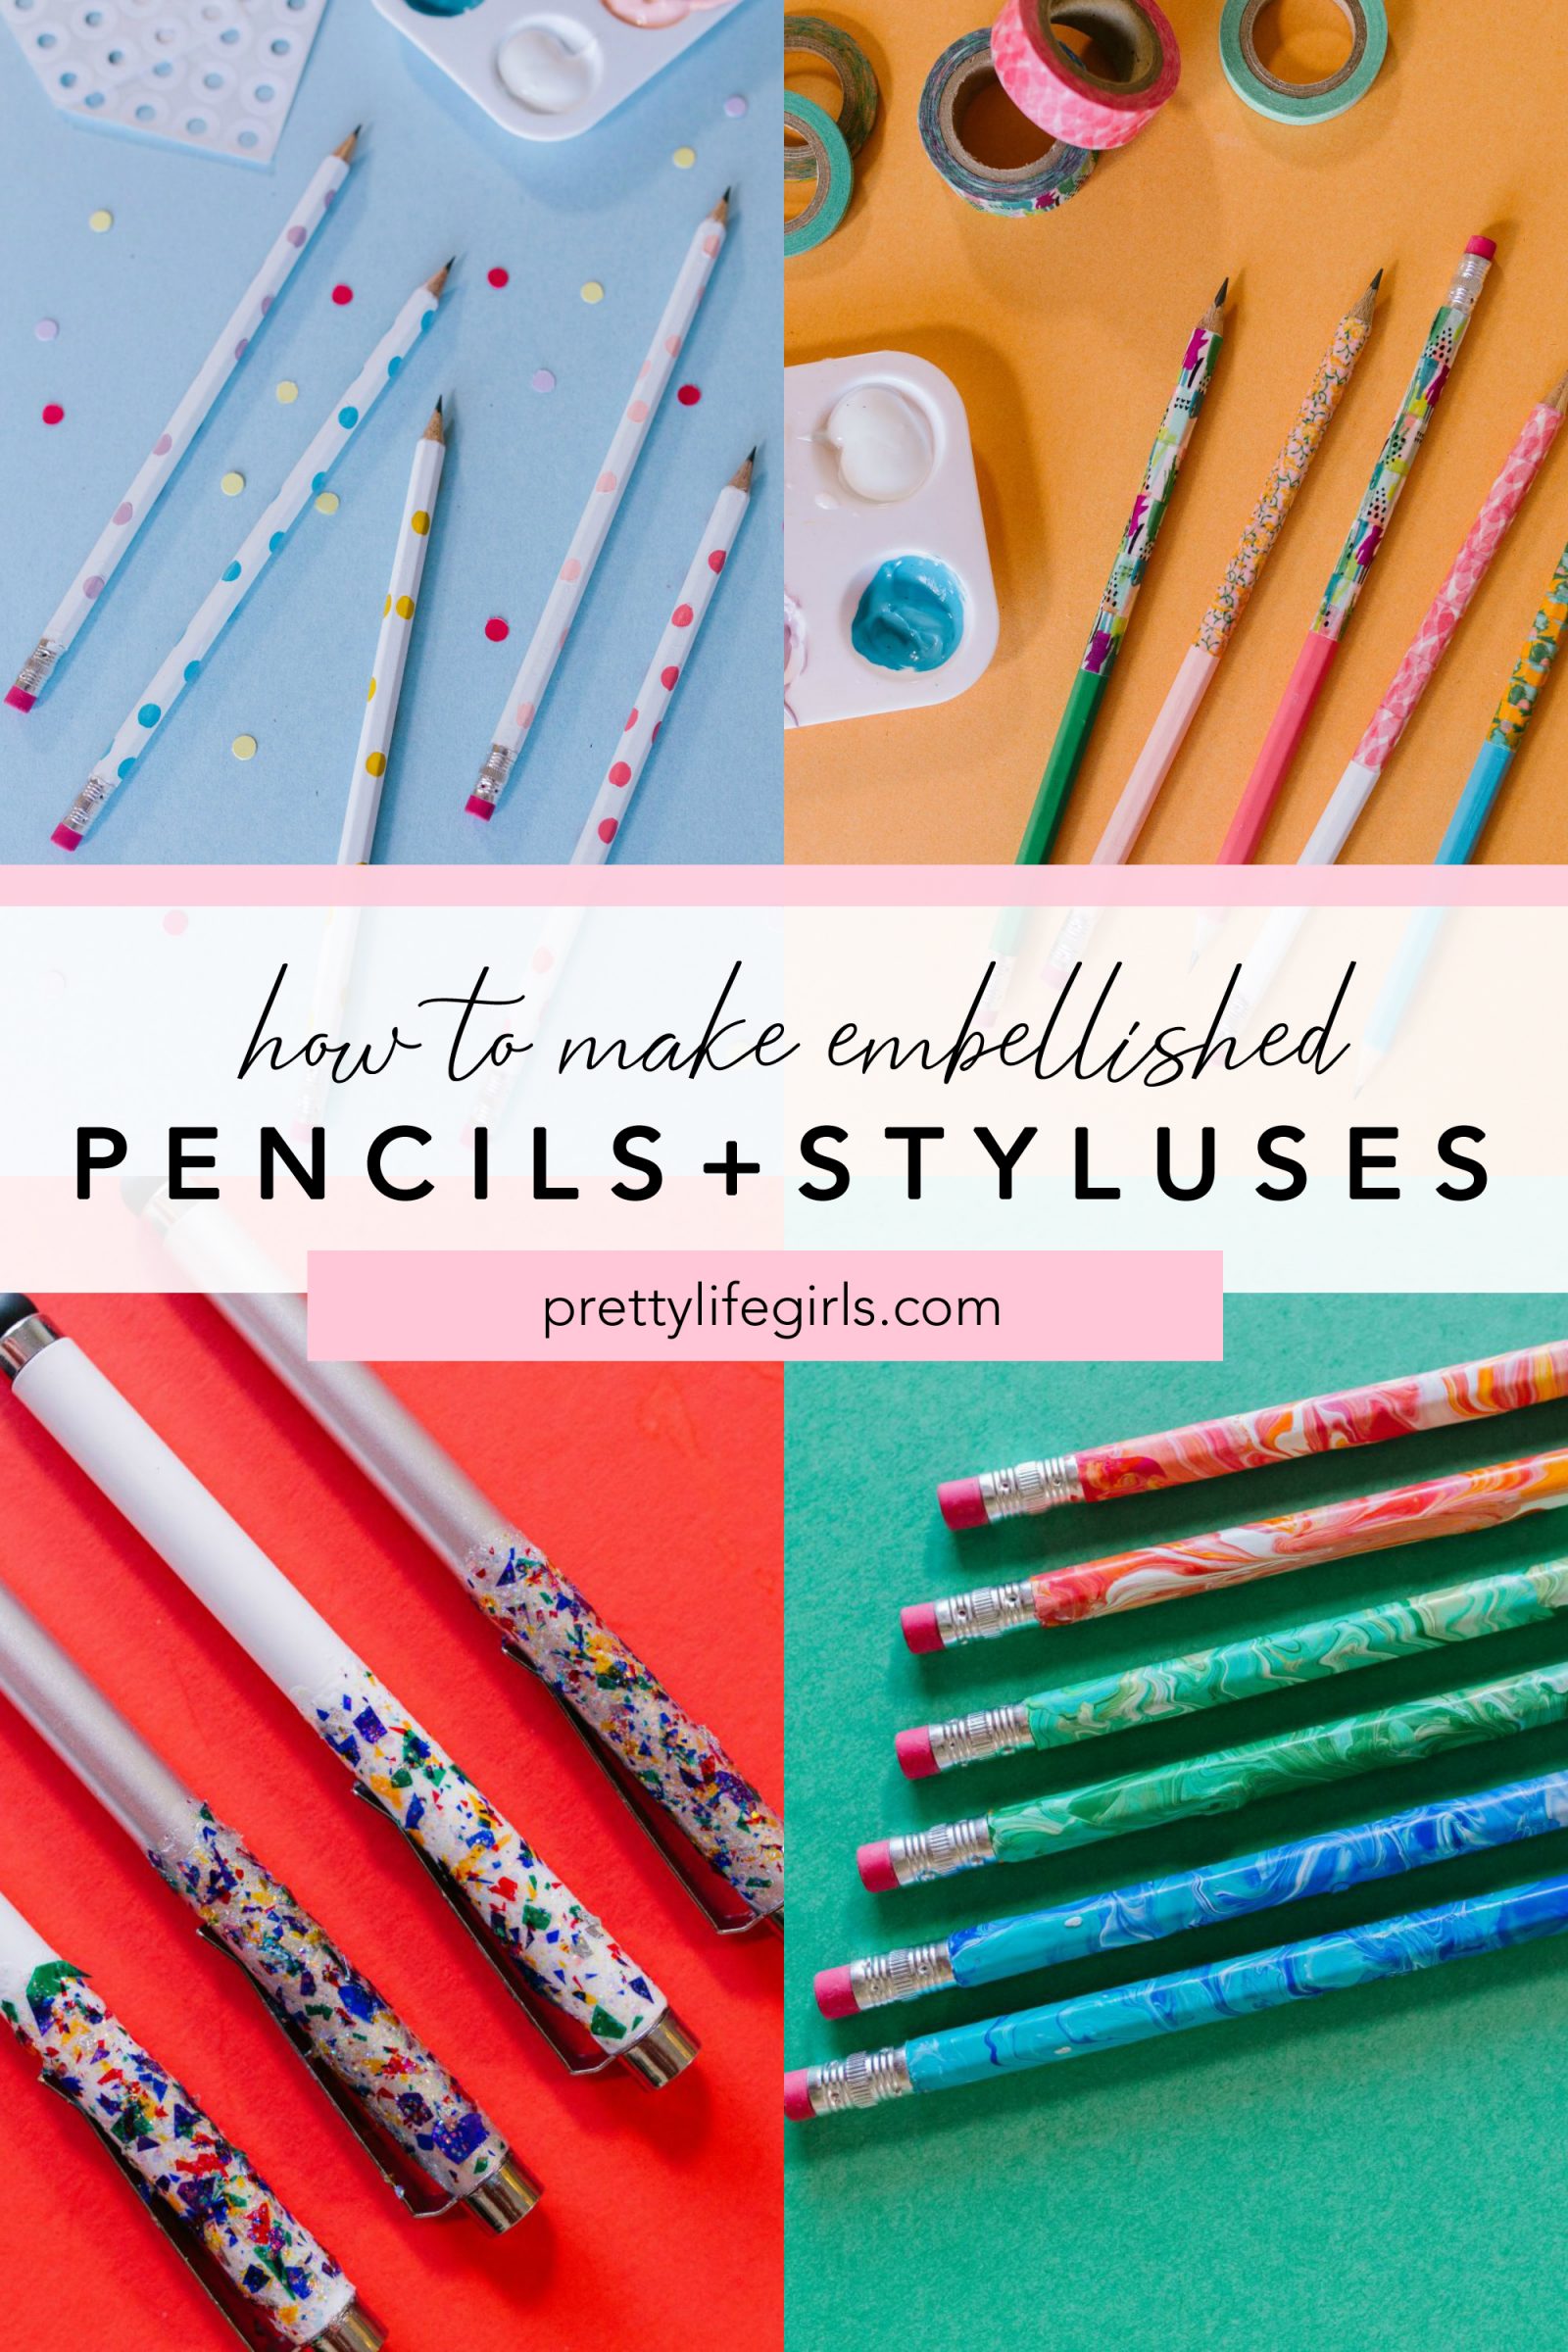 Back to School Crafts: How to Make Embellished Pencils 3 Ways + a tutorial featured by Top US Craft Blog + The Pretty Life Girls